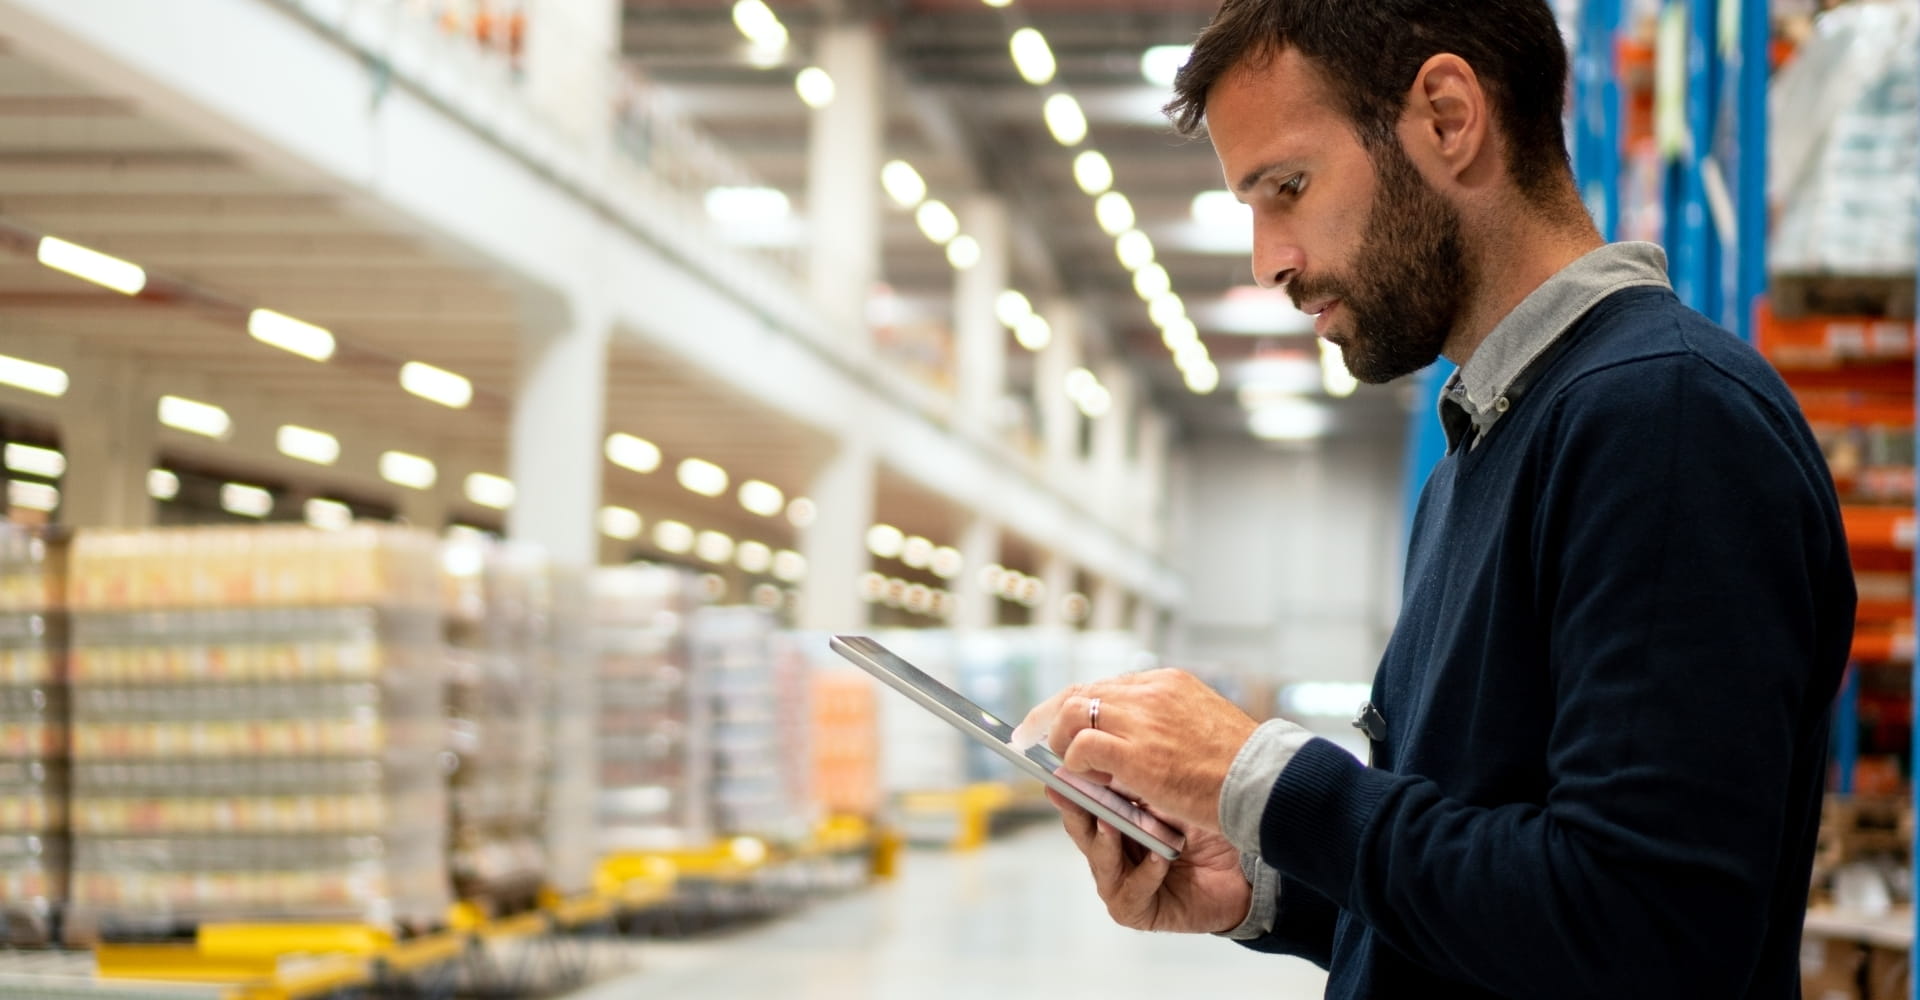 The Role of Blockchain in Warehouse Management